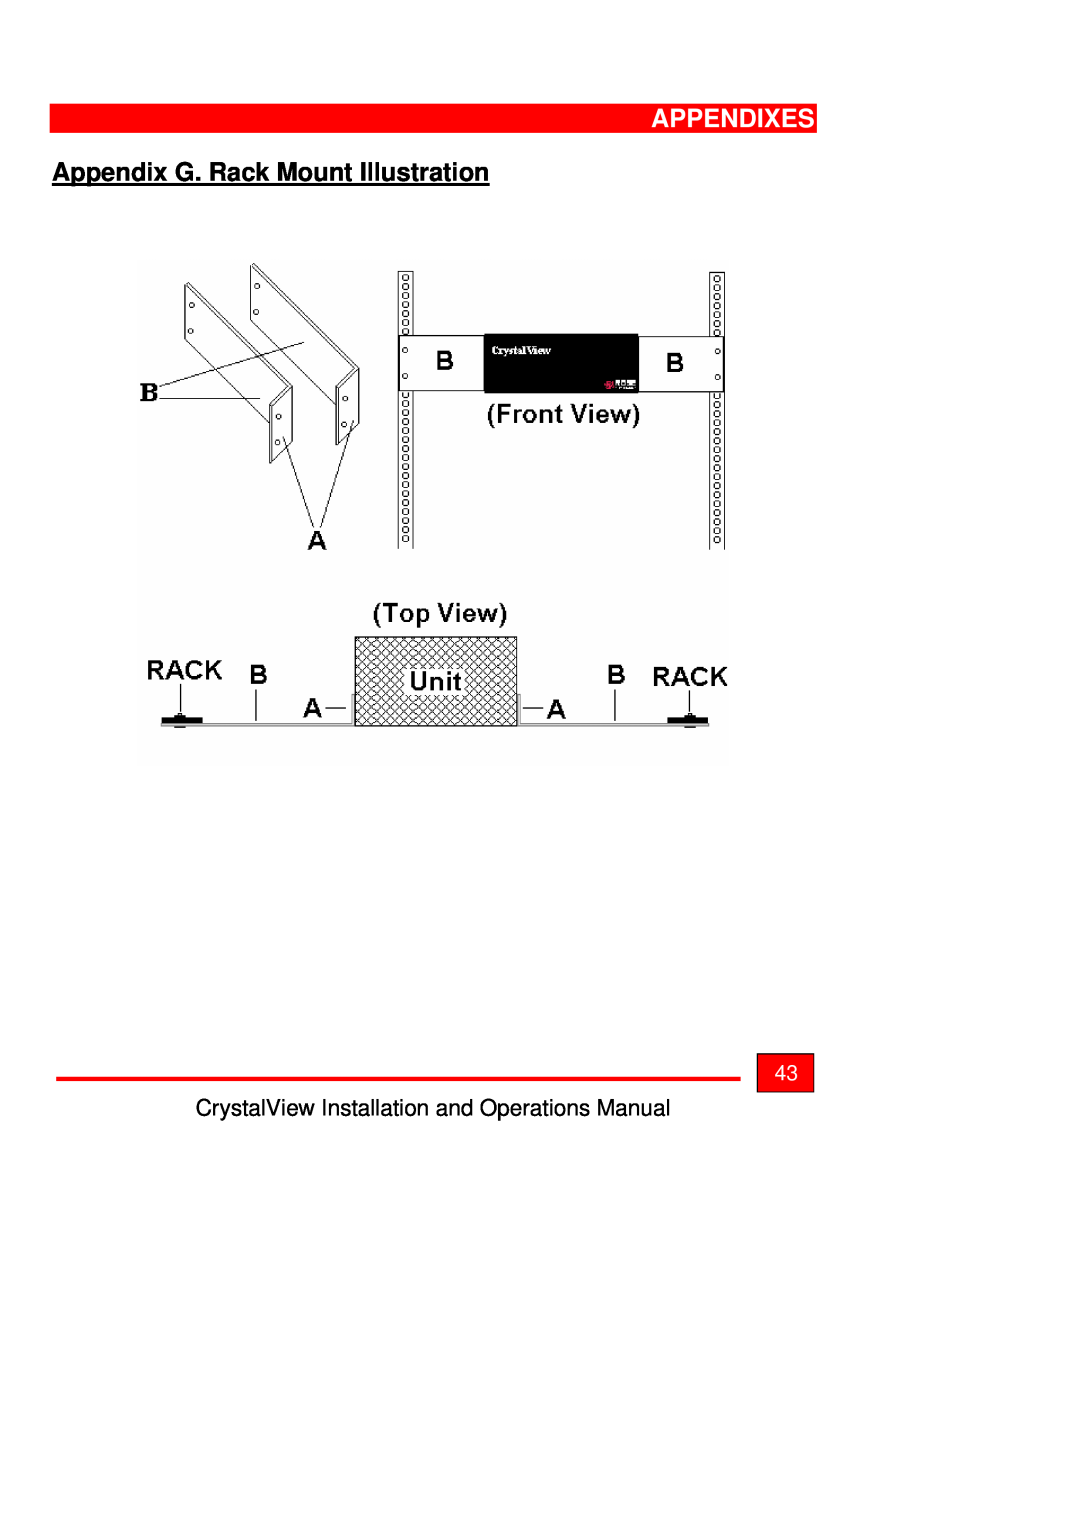 Rose electronic Crystal View operation manual Appendix G. Rack Mount Illustration, Appendixes 